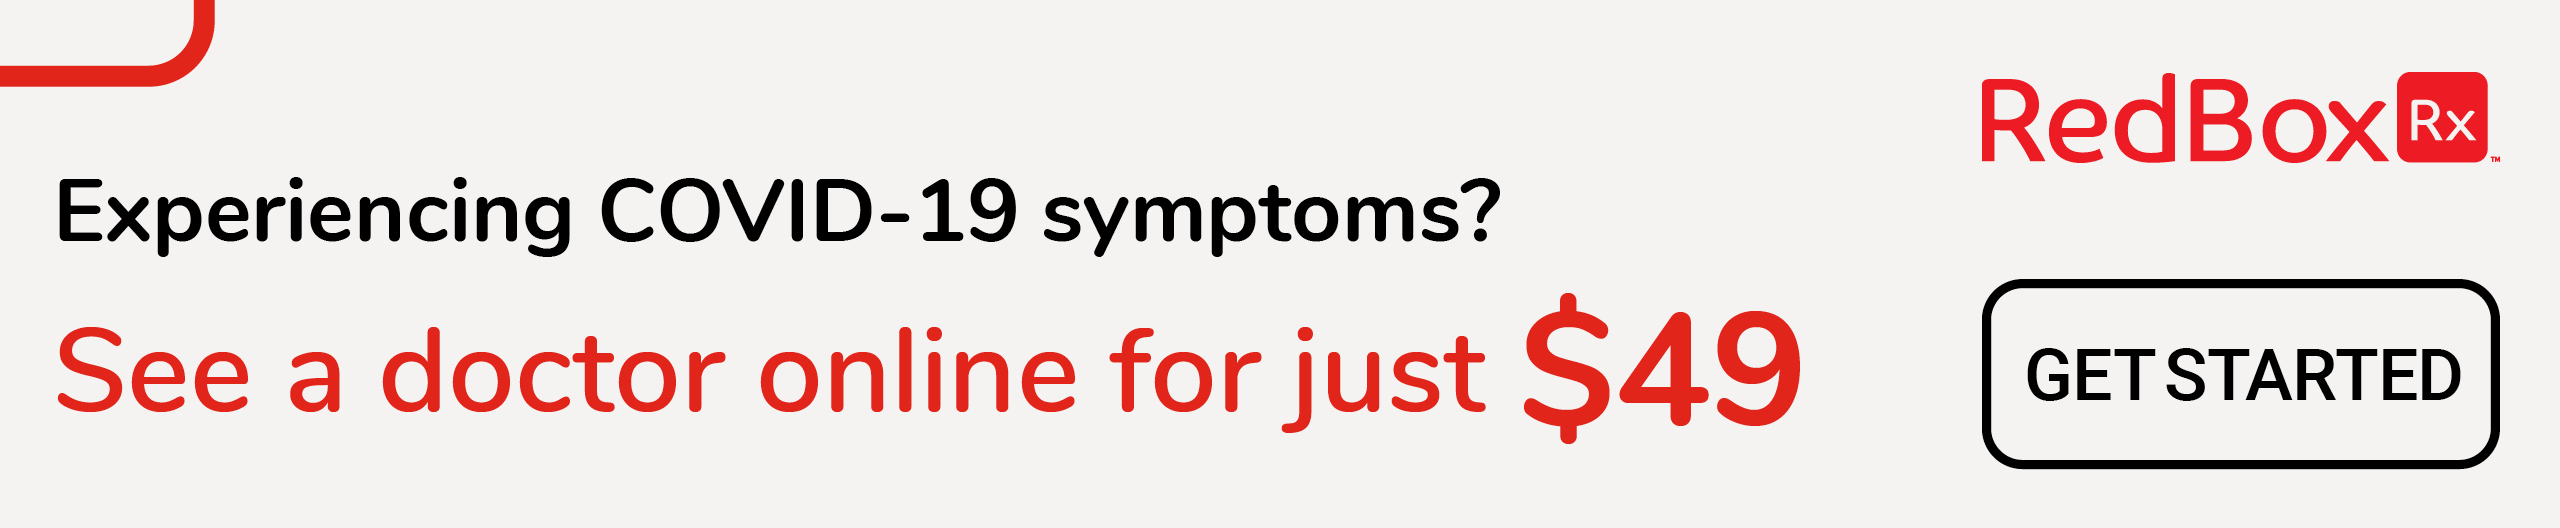 Experiencing COVID-19 symptoms? See a doctor online for just $49. Get started link.